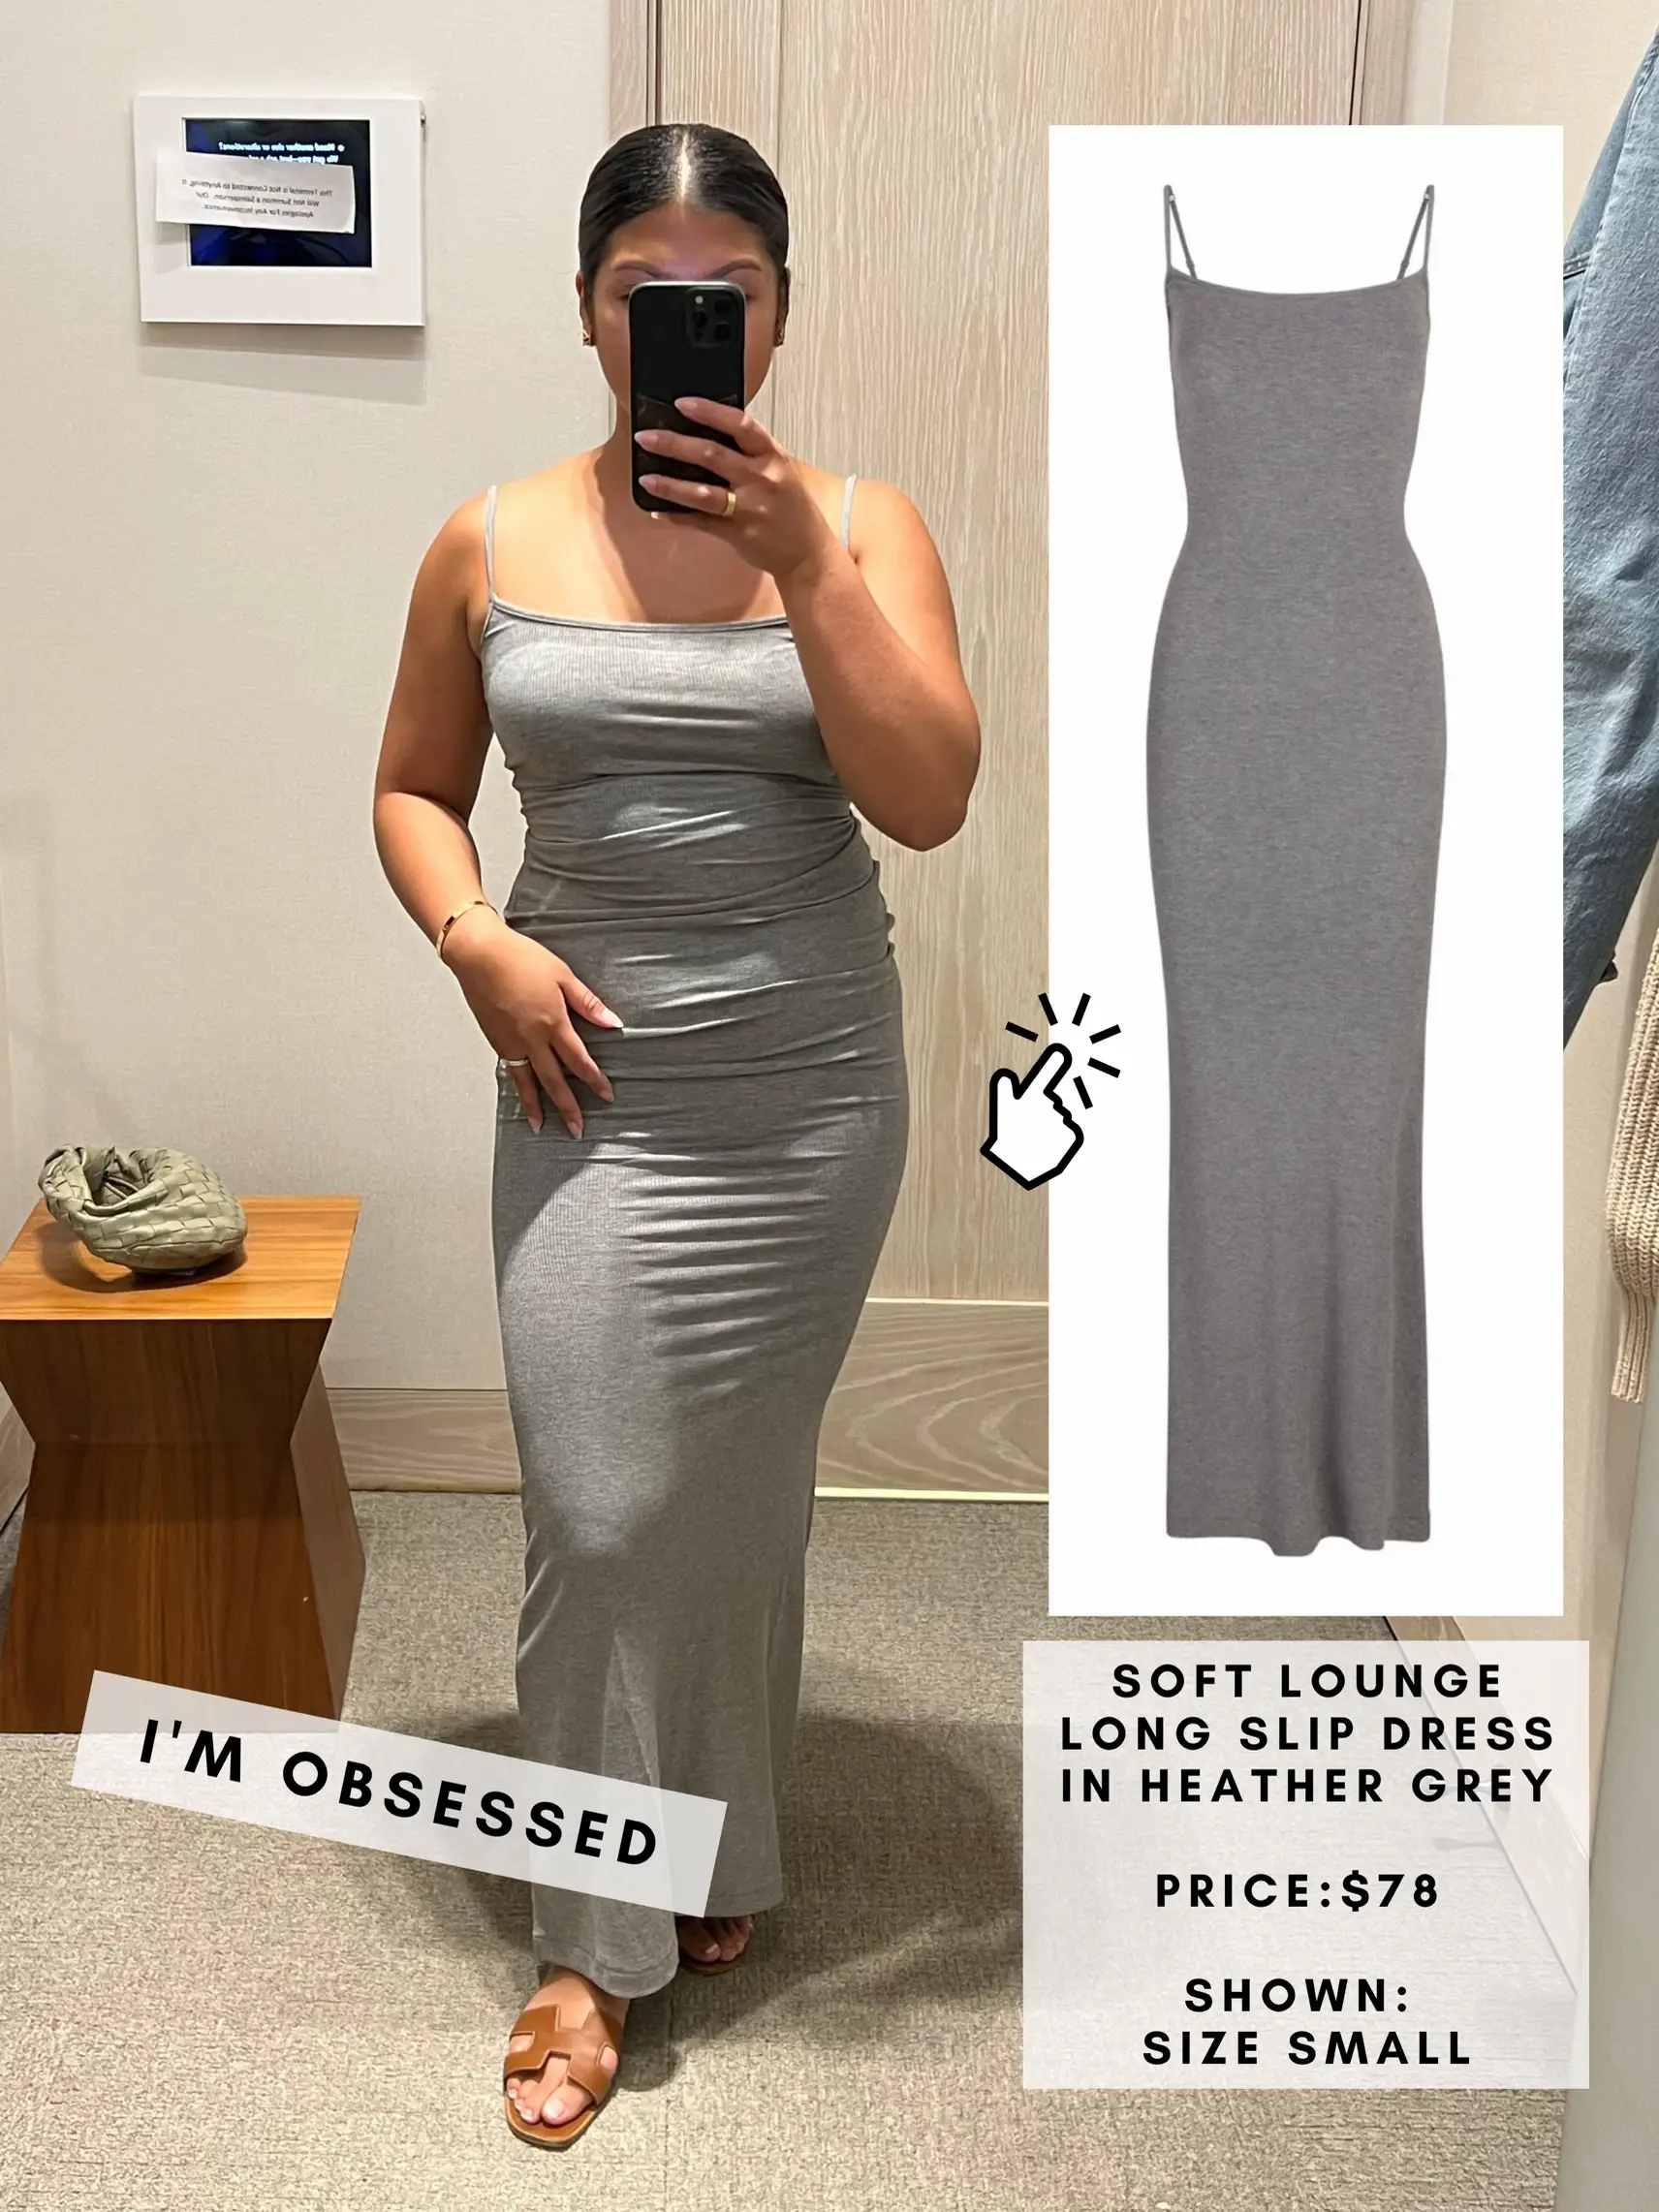 I'm 5'2 and a size 6 - I tried the viral Skims dress in white, it was a lot  more see-through than the black